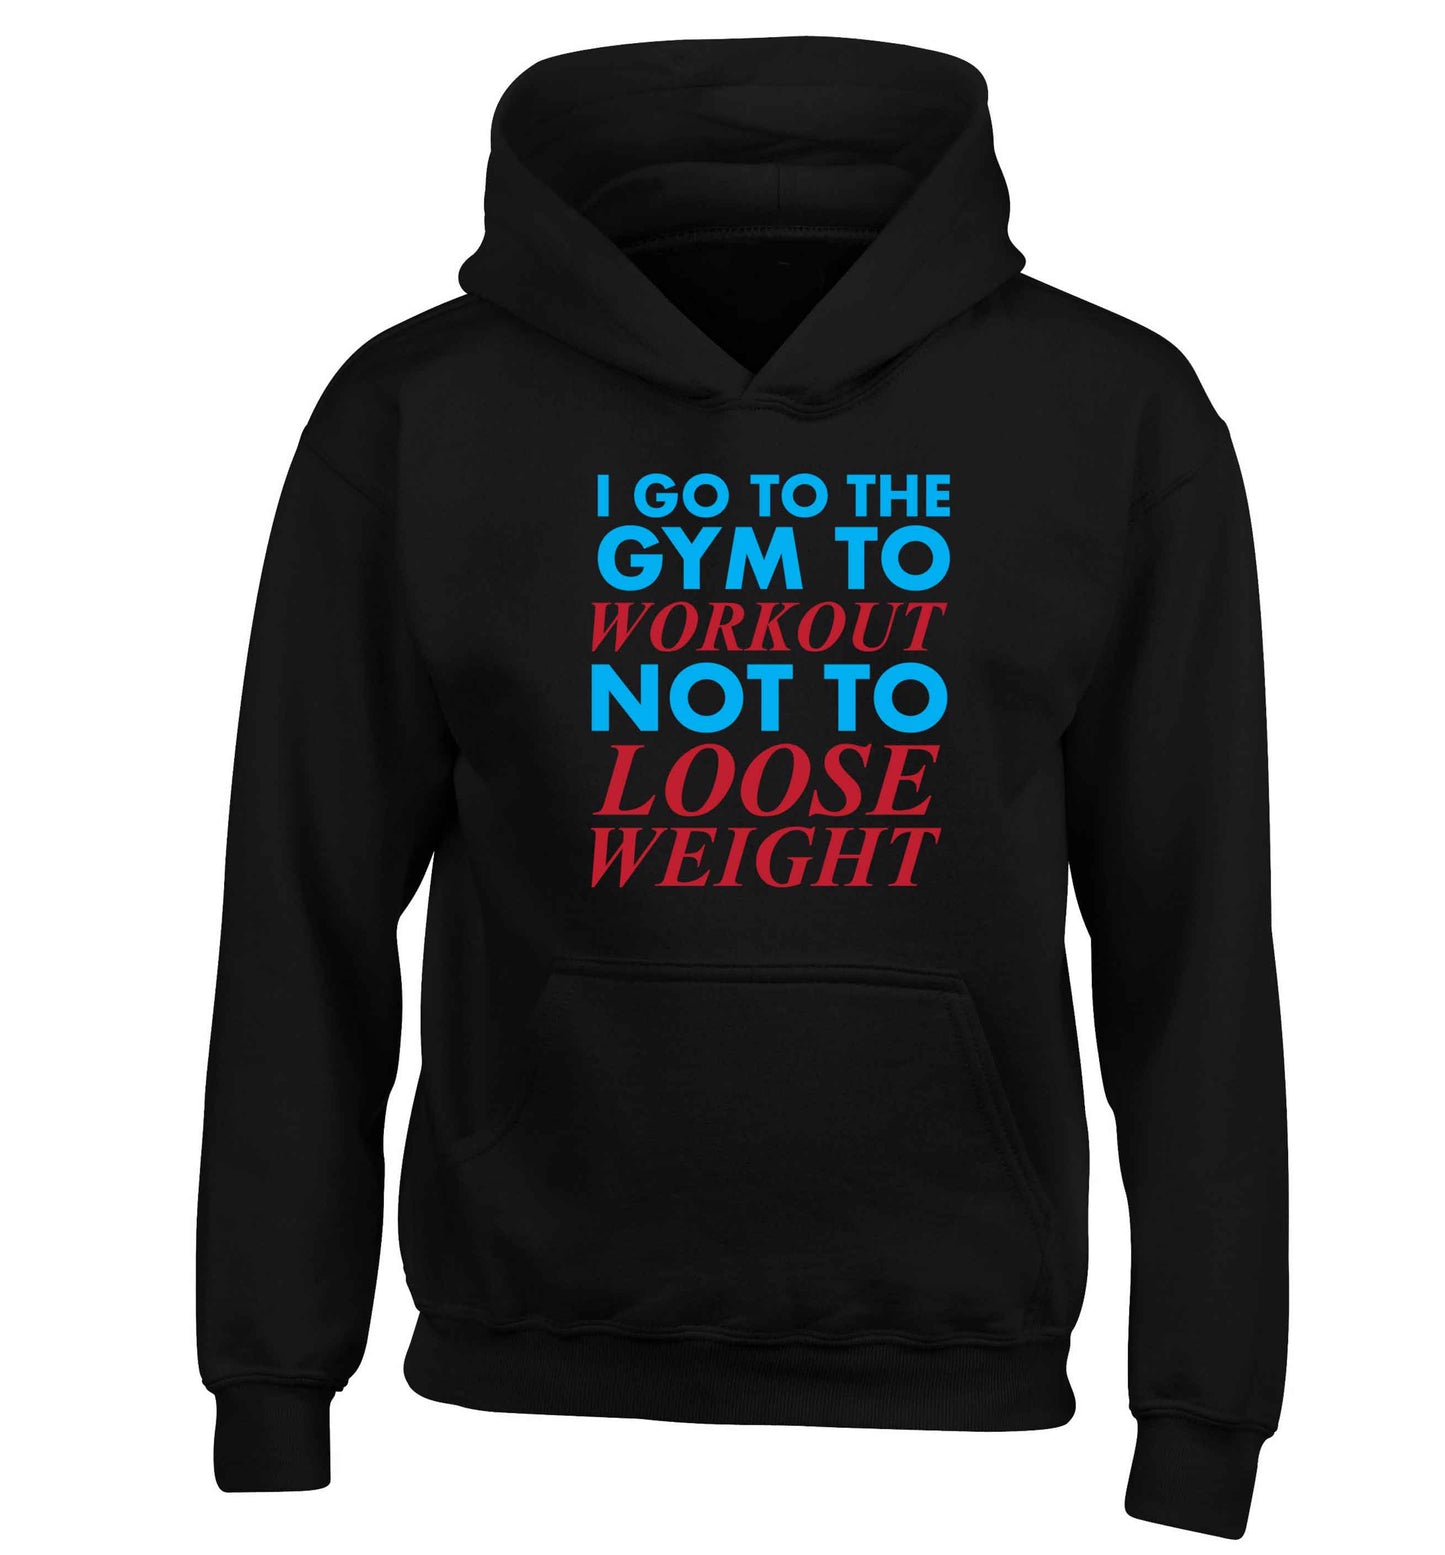 I go to the gym to workout not to loose weight children's black hoodie 12-13 Years